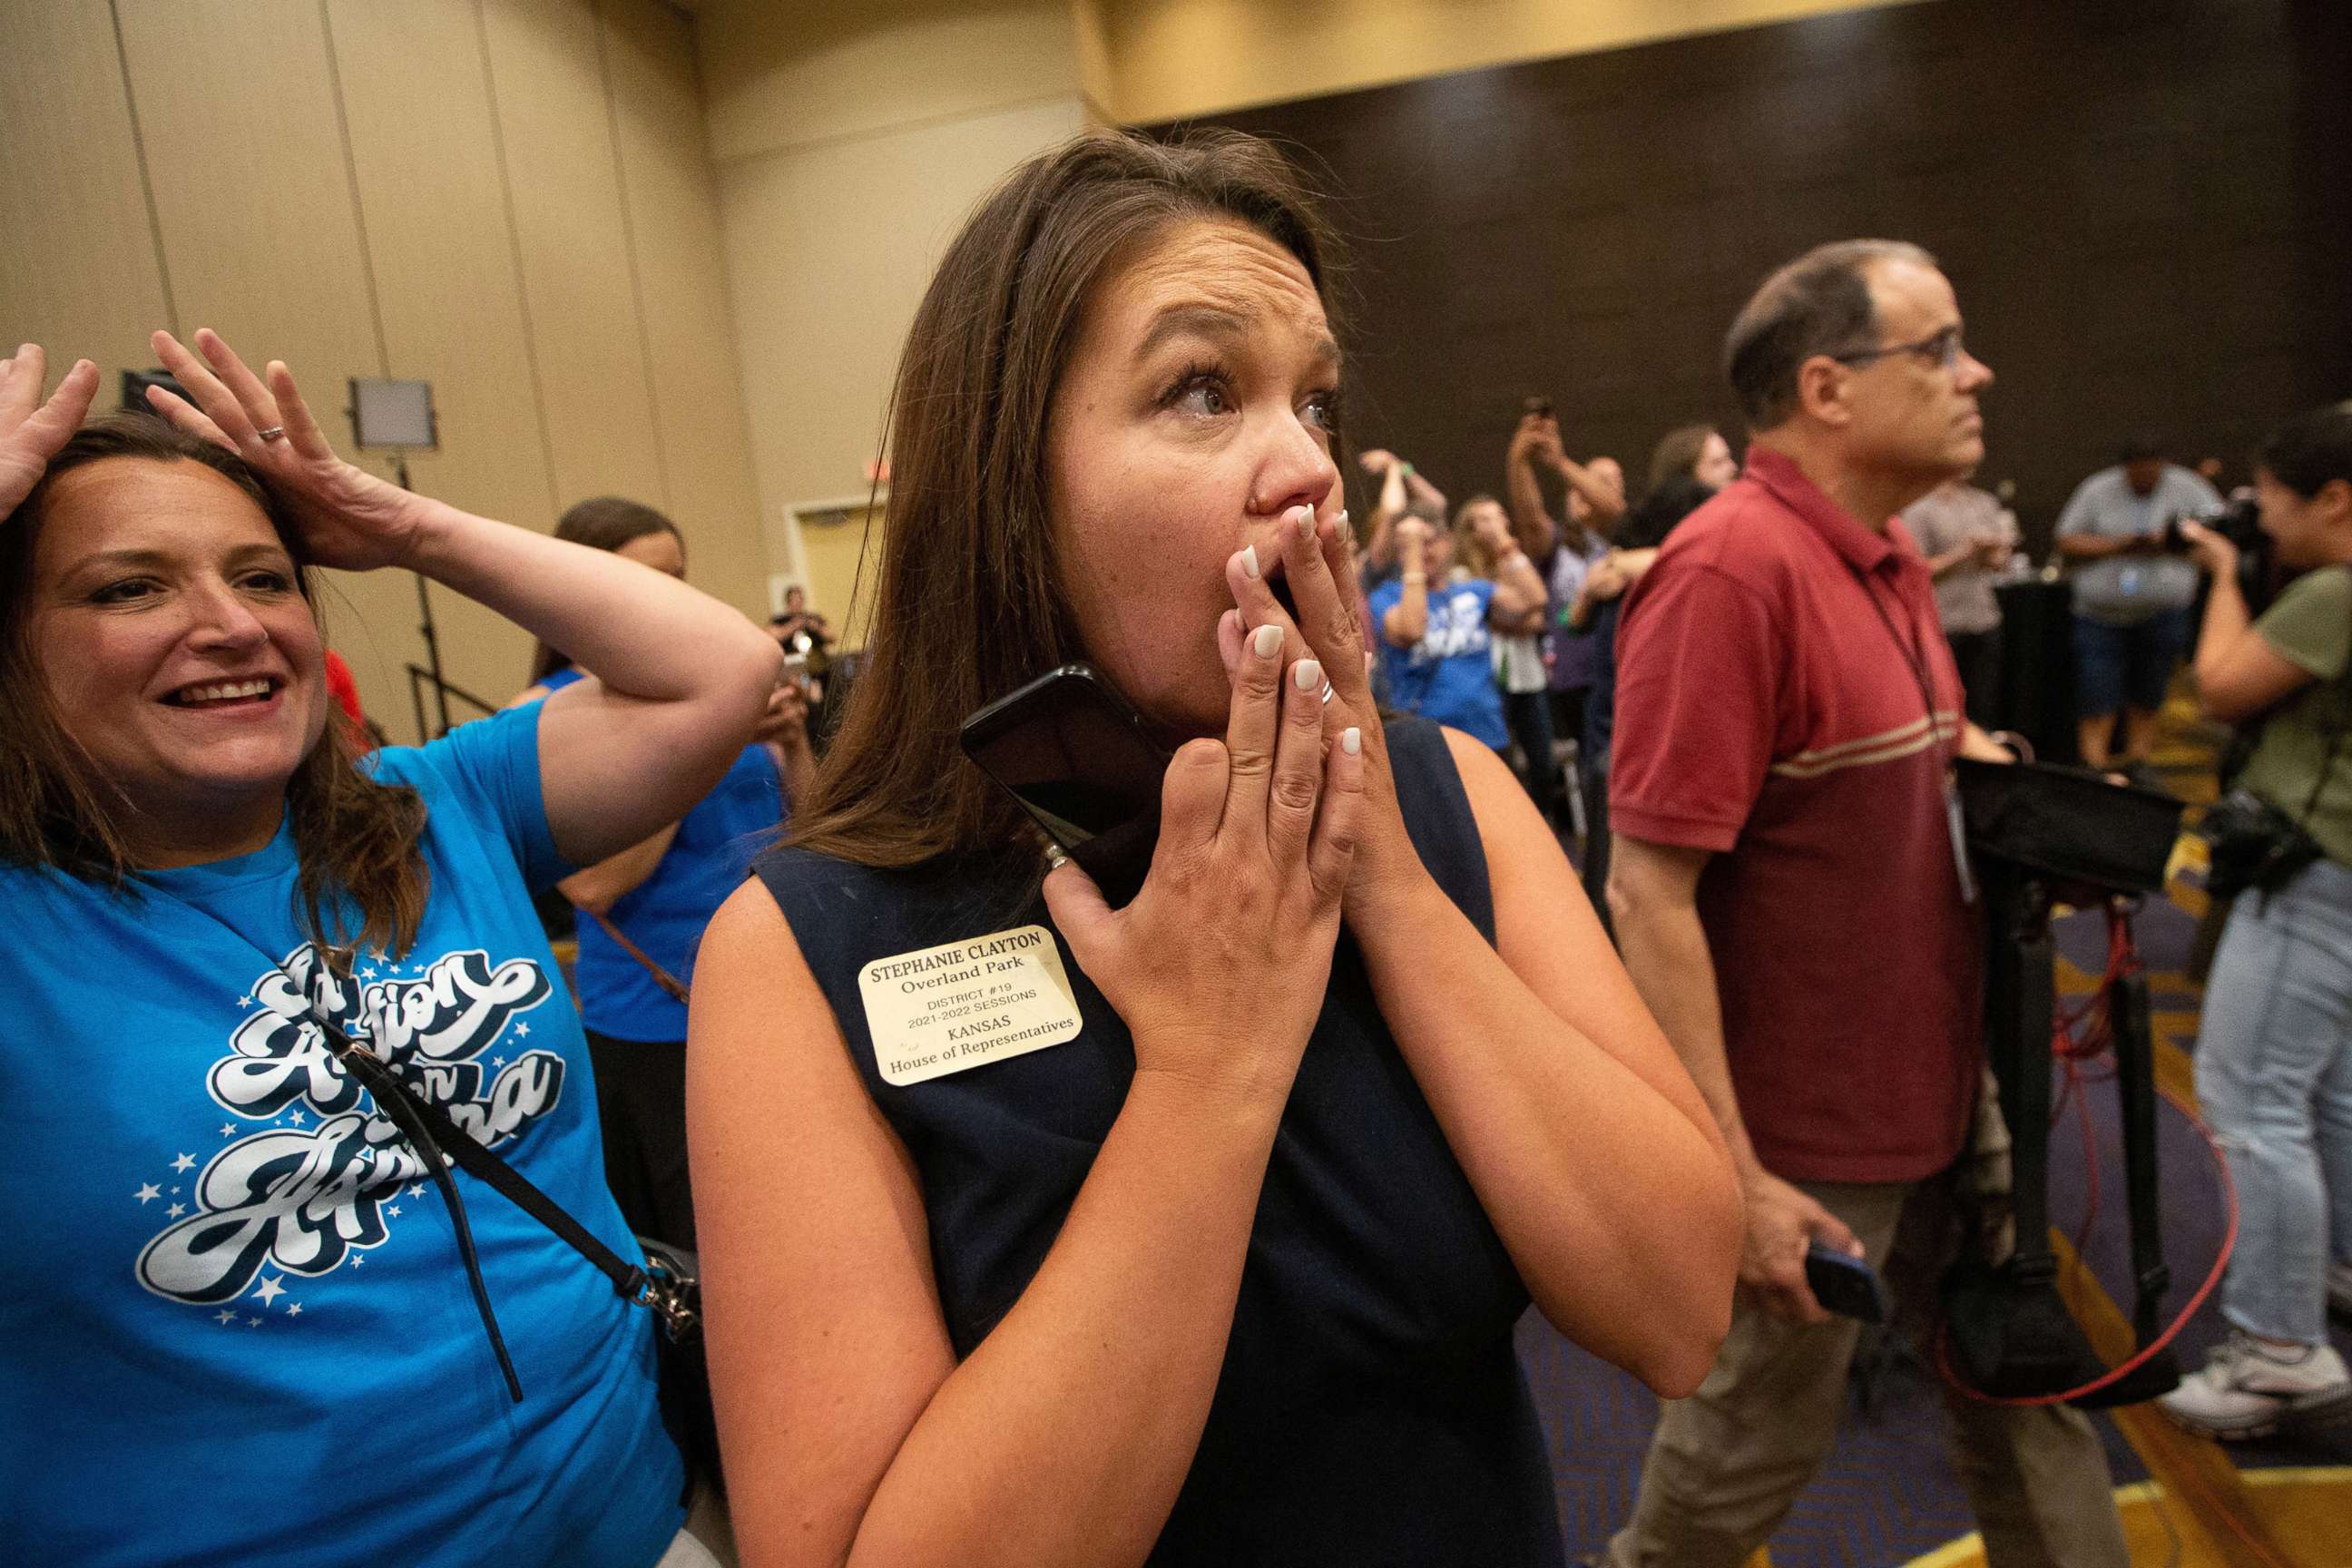 State Rep. Stephanie Clayton reacts to news that a constitutional amendment that would have declared there is no right to abortion was voted down, during the Kansans for Constitutional Freedom election watch party,in Overland Park, Kan, Aug. 8, 2022.